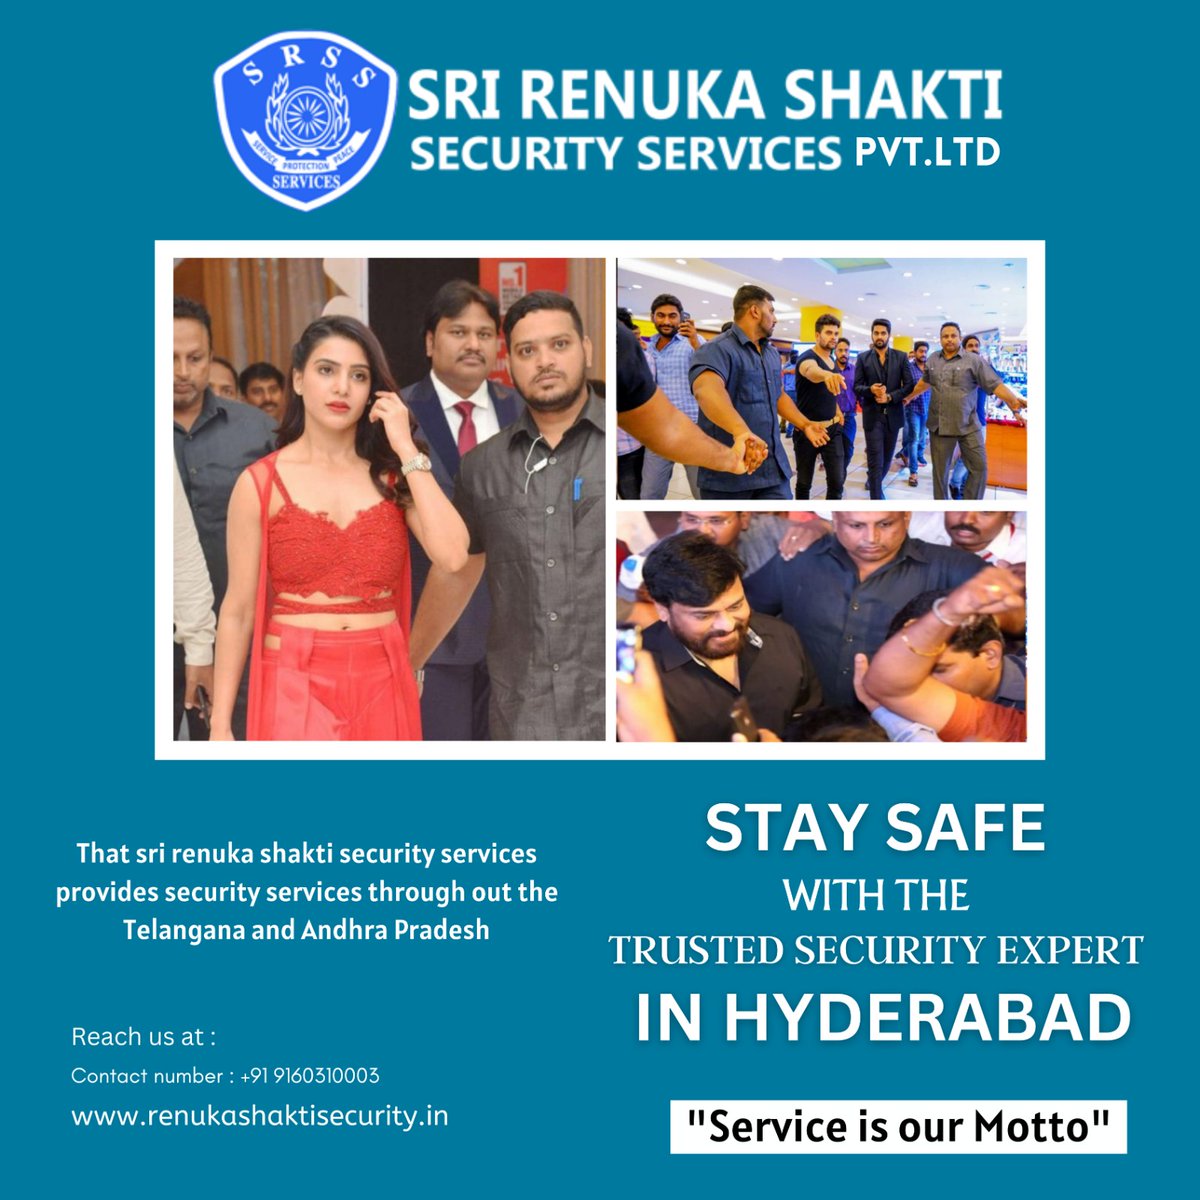 Experience heightened levels of protection with our customized security solutions that cater to your individual needs.
#SriRenukaShaktiSecurity #YourSafetyMatters #ExpertSecuritySolutions #TopNotchProtection #ReliabilityAndProfessionalism #SafetyInnovation #TailoredSecurity